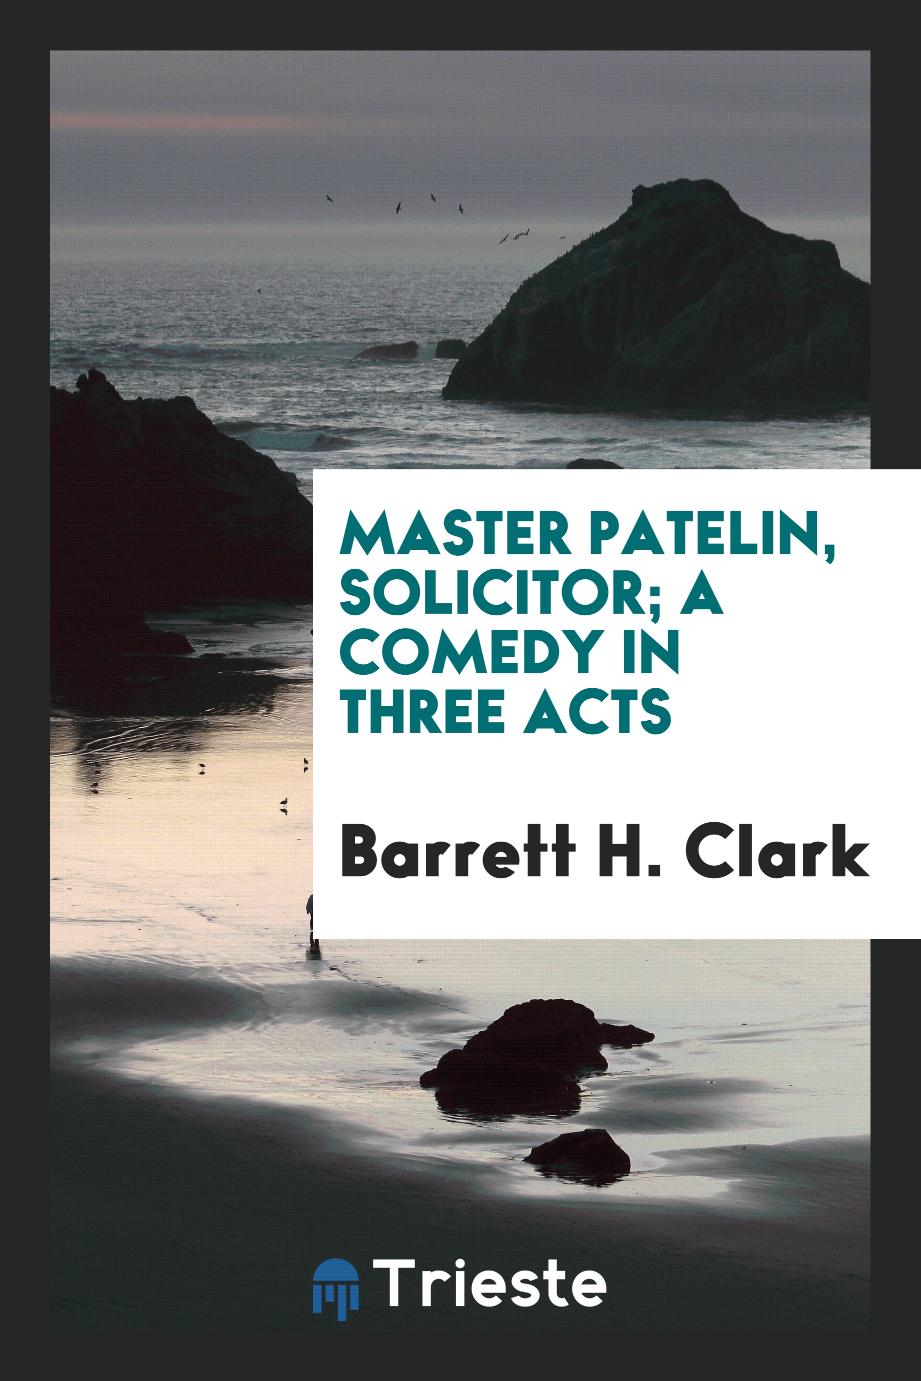 Master Patelin, solicitor; a comedy in three acts